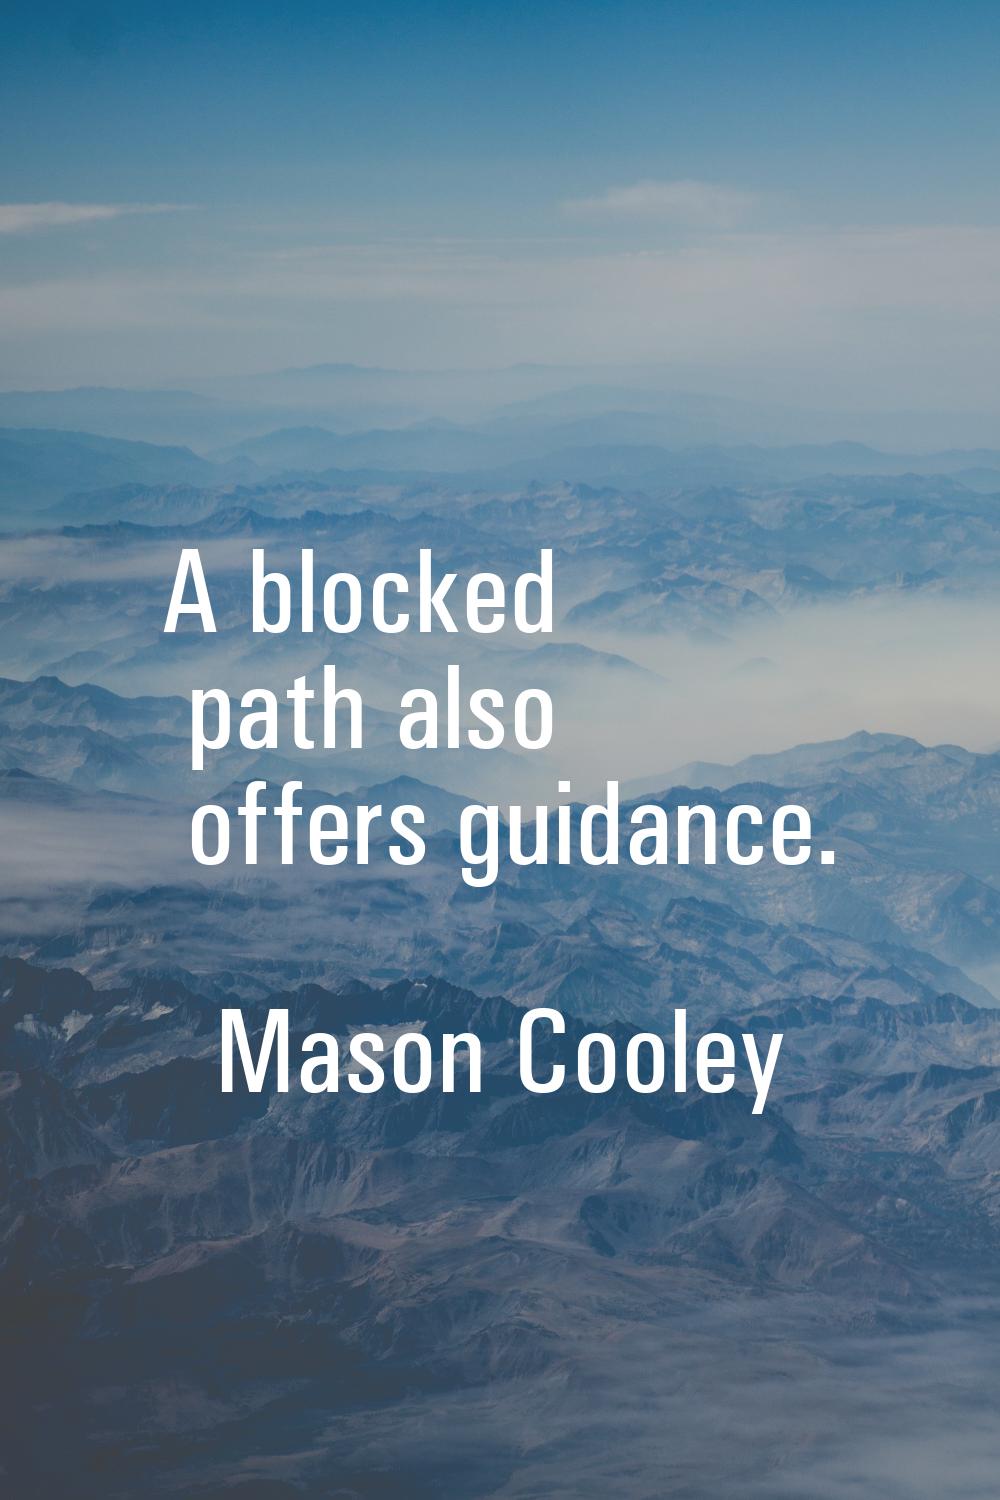 A blocked path also offers guidance.